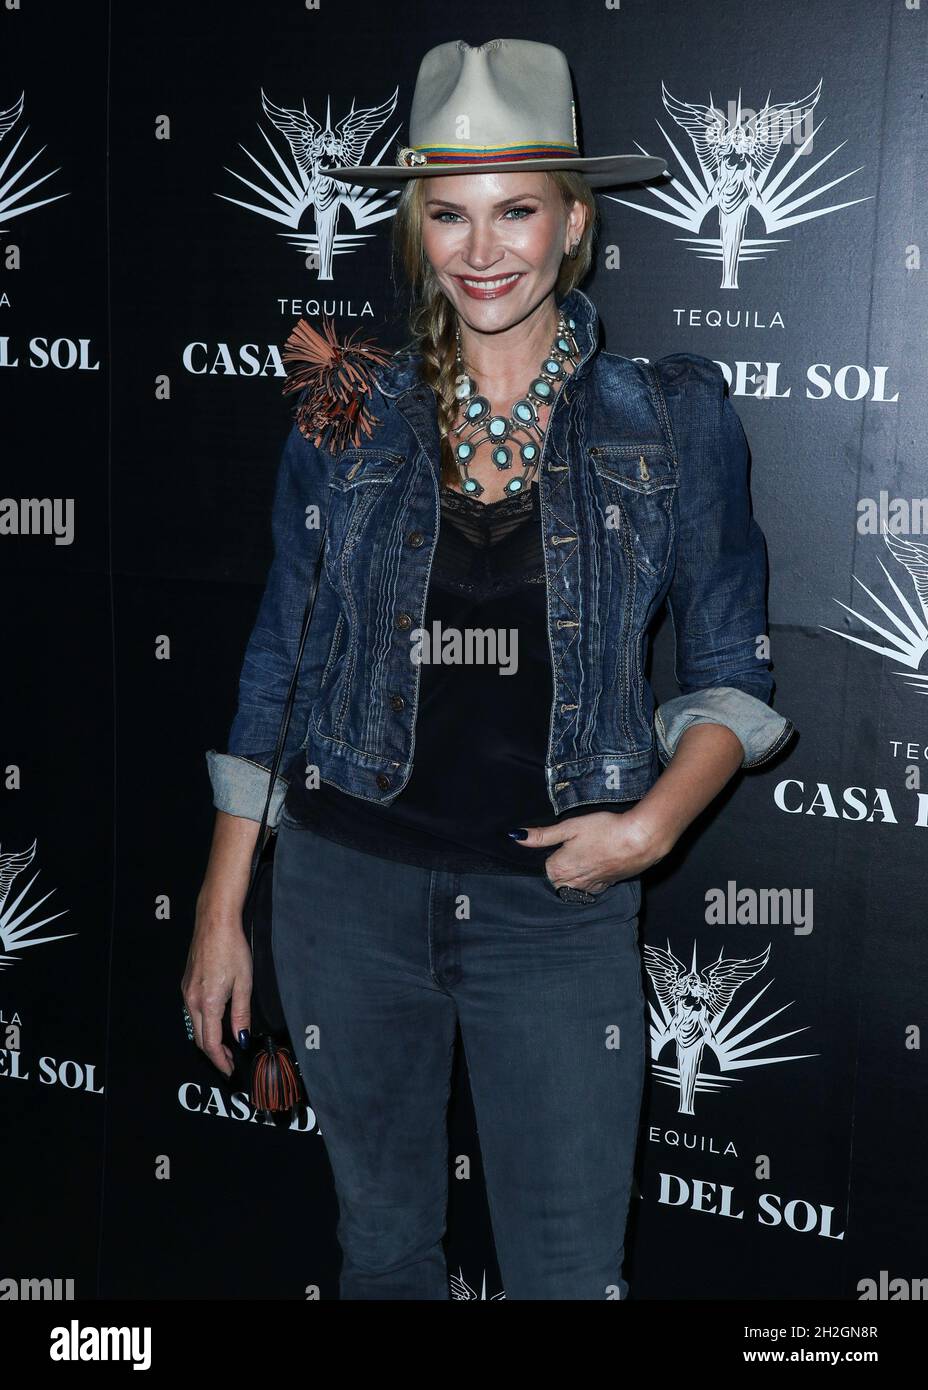 Los Angeles, United States. 21st Oct, 2021. LOS ANGELES, CALIFORNIA, USA - OCTOBER 21: Actress Natasha Henstridge arrives at Brian Bowen Smith's Drivebys Book Launch And Gallery Viewing Presented By Casa Del Sol Tequila held at 8175 Melrose Ave on October 21, 2021 in Los Angeles, California, United States. (Photo by Xavier Collin/Image Press Agency) Credit: Image Press Agency/Alamy Live News Stock Photo